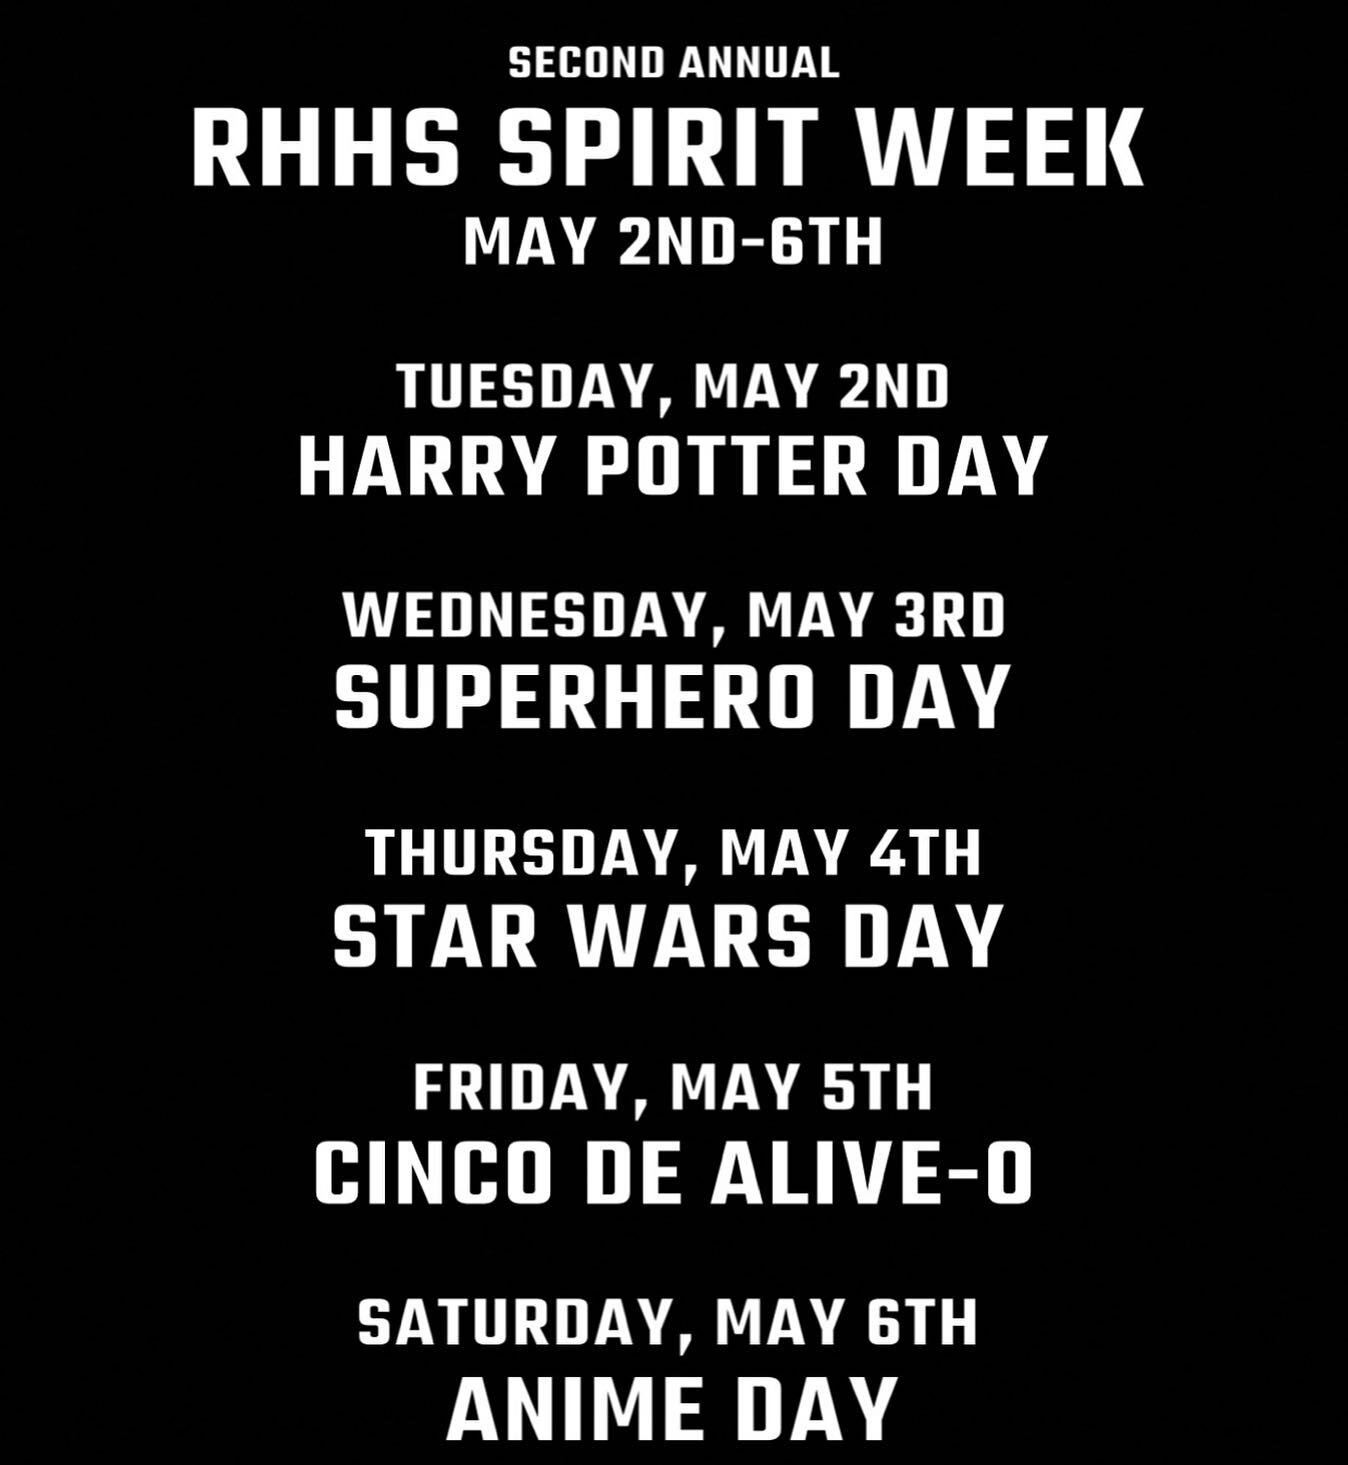 NEXT WEEK IS SPIRIT WEEK

Tuesday, May 2nd: Harry Potter Day
Dress up as your favorite Harry Potter character, wear some circular glasses, bring in a wand, etc.

Wednesday, May 3rd: Superhero Day
Wear a superhero costume, break out a sweet graphic te